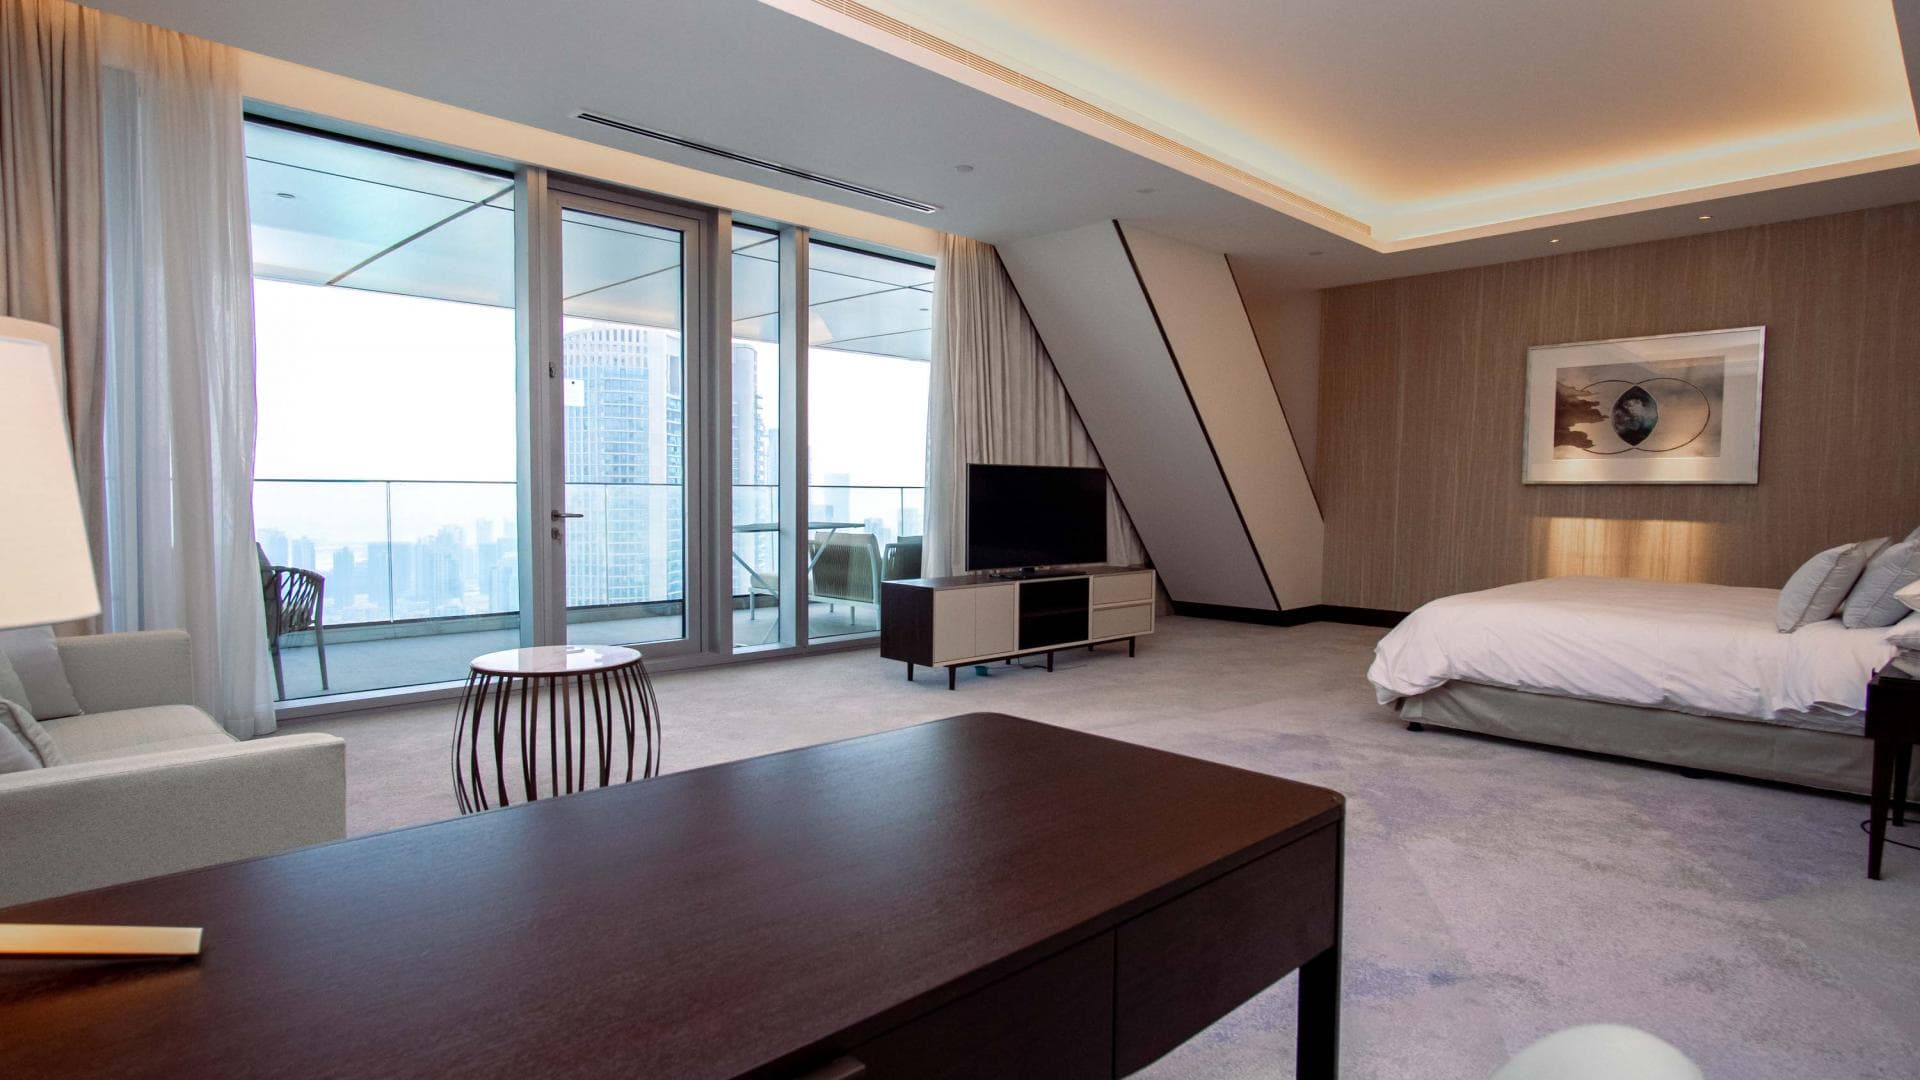 3 Bedroom Penthouse For Rent The Address Sky View Towers Lp14613 55b0d844e26dbc0.jpg